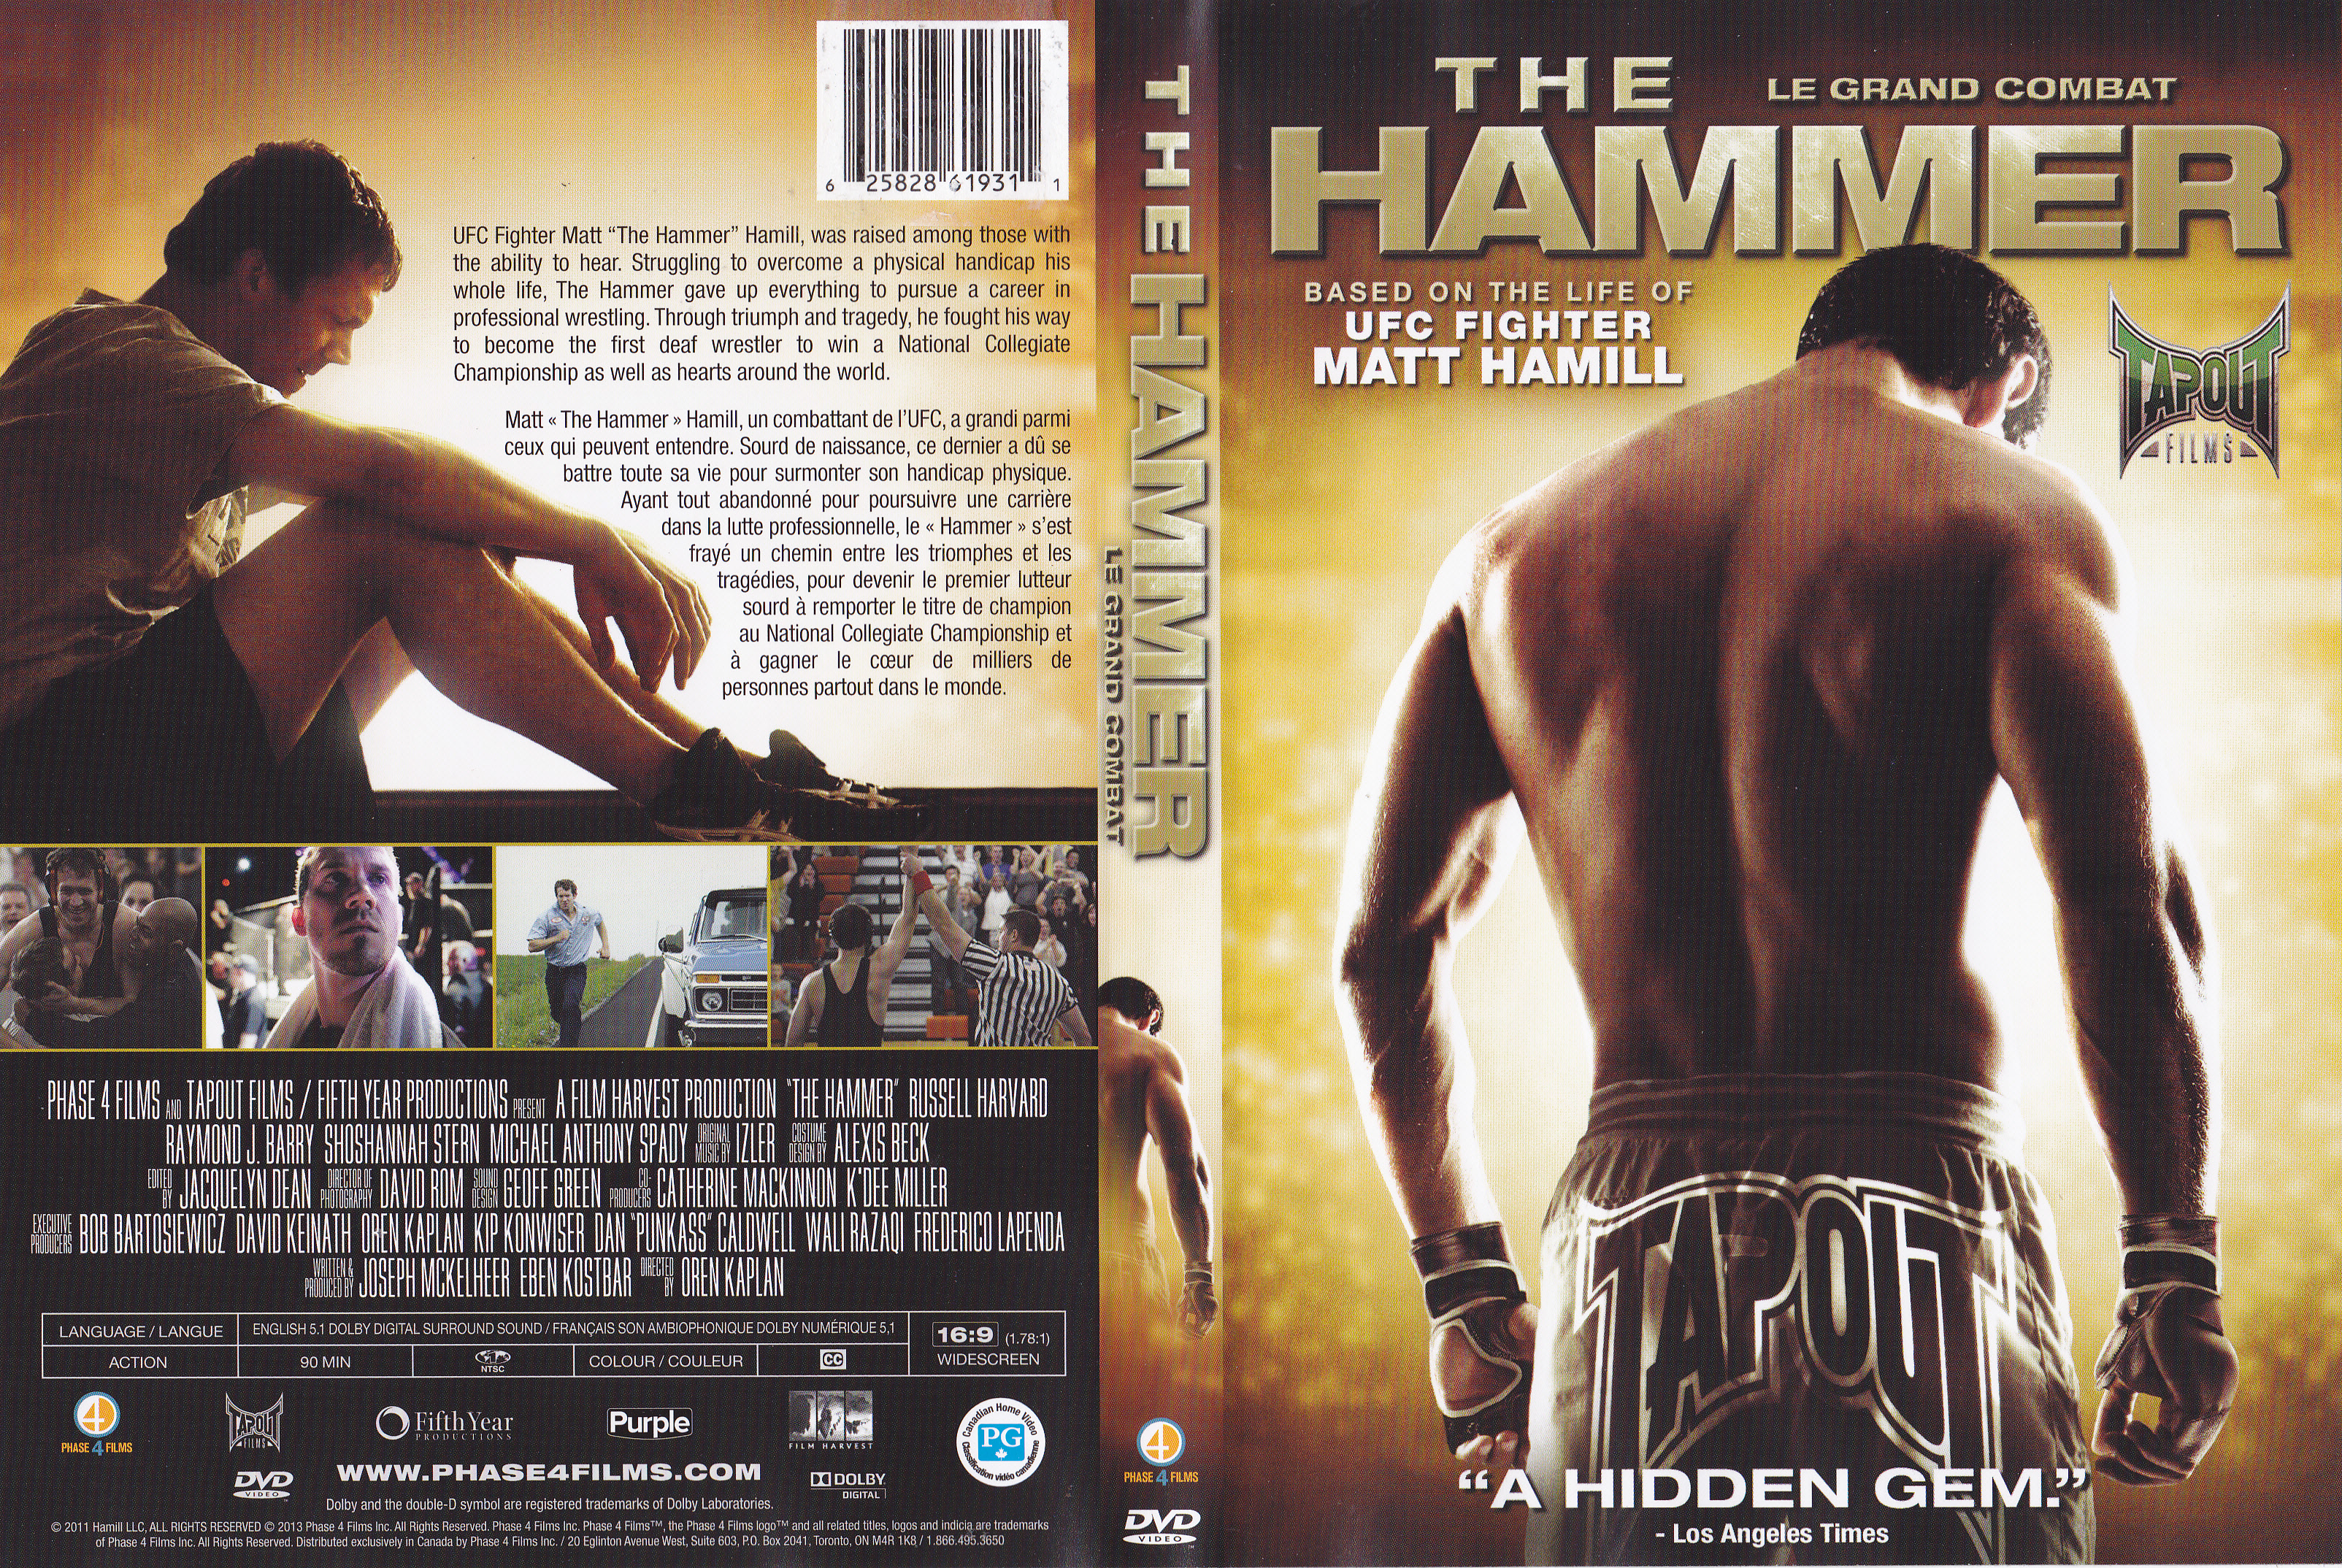 Jaquette DVD The hammer - Le grand combat (Canadienne)